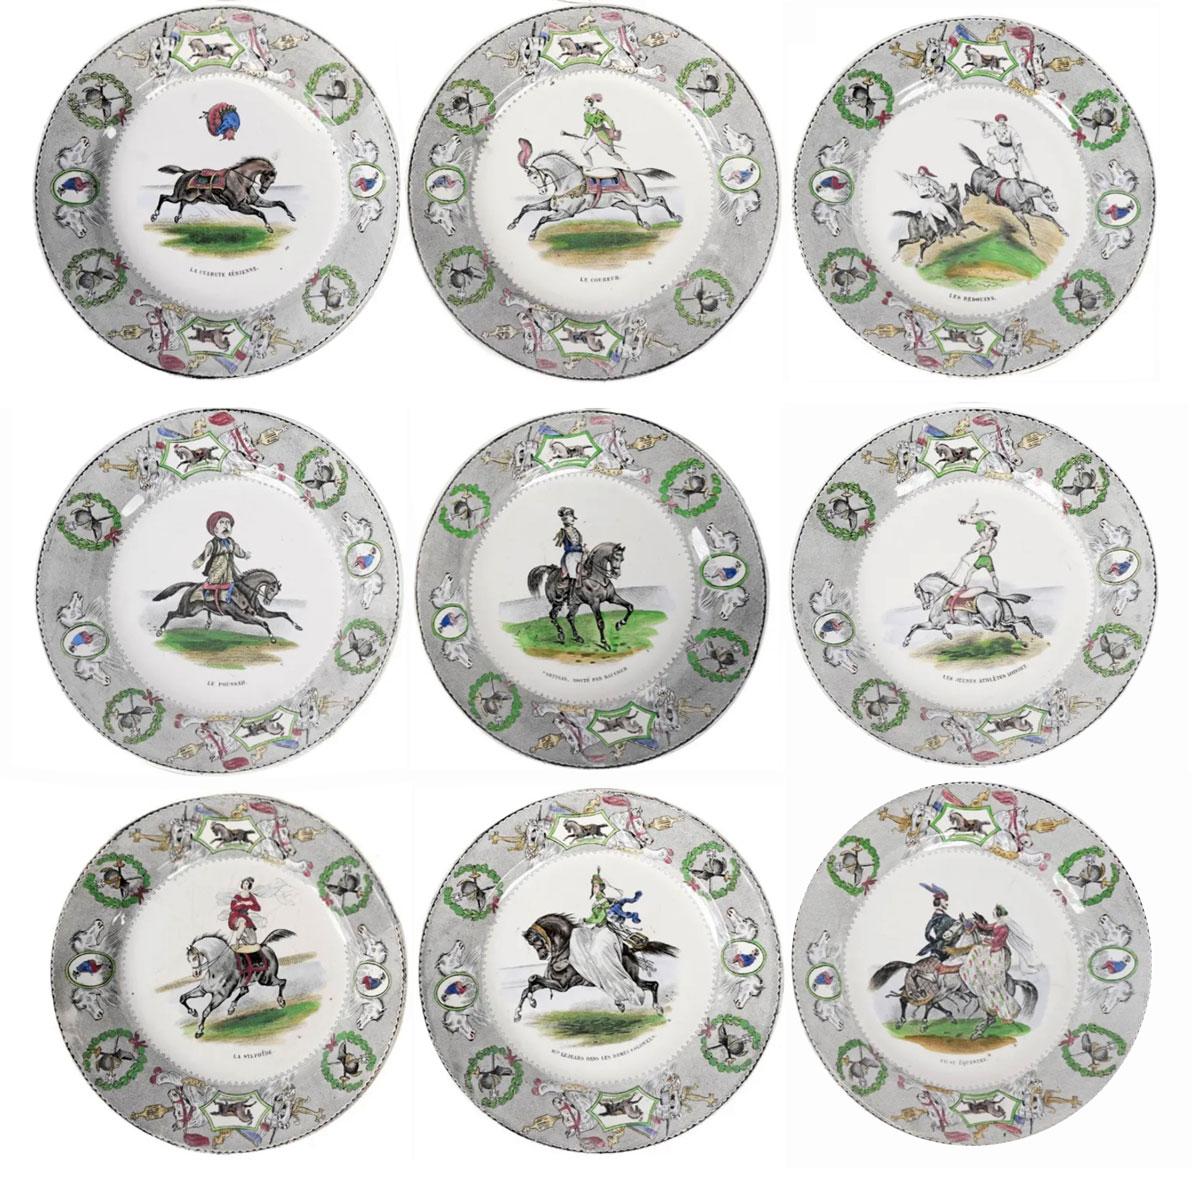 12 assiettes in white earthenware decorated with colored Horse Show scenes represeting eventing horses with costumed riders, such as Clows, Athletes or Bedouins doing performances. Horses are designed in the very 19th century style, accordingly to